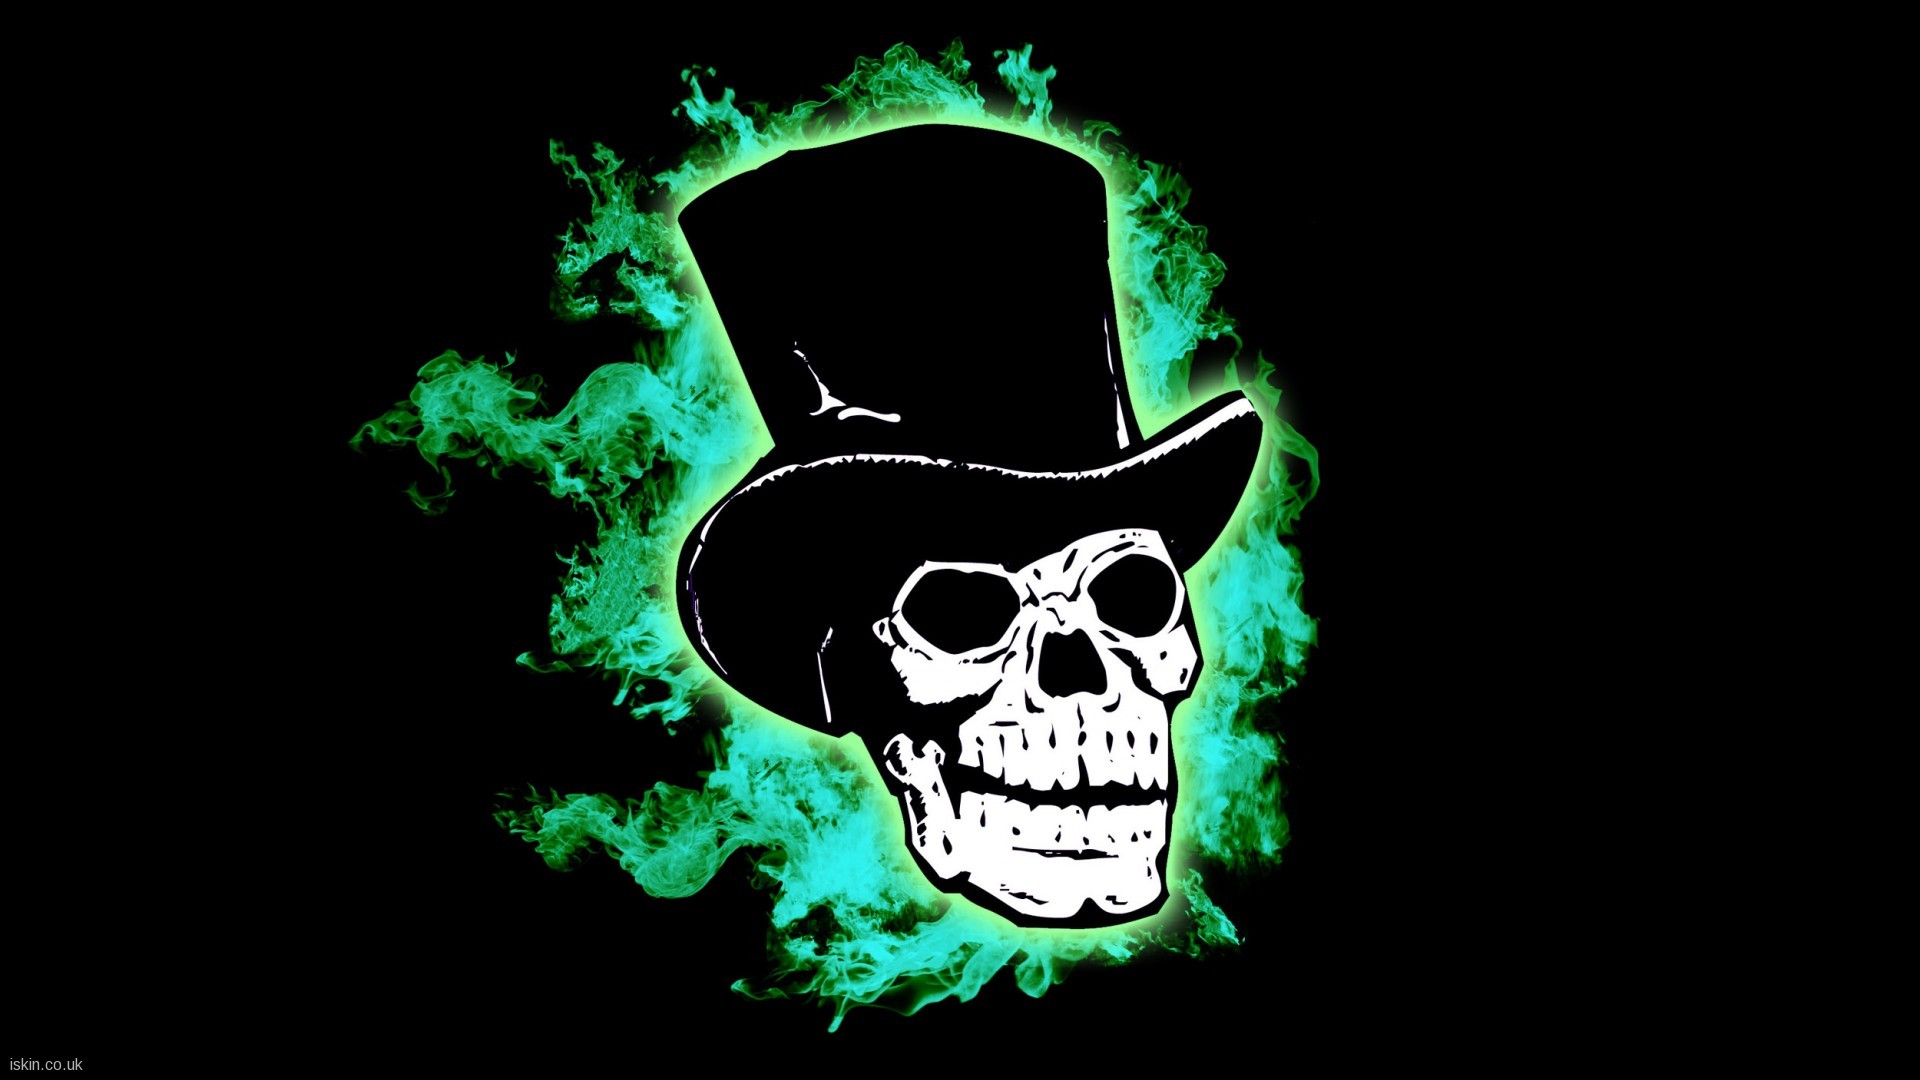 1920x1080 0 Awesome Skull Backgrounds Awesome Skull Wallpaper